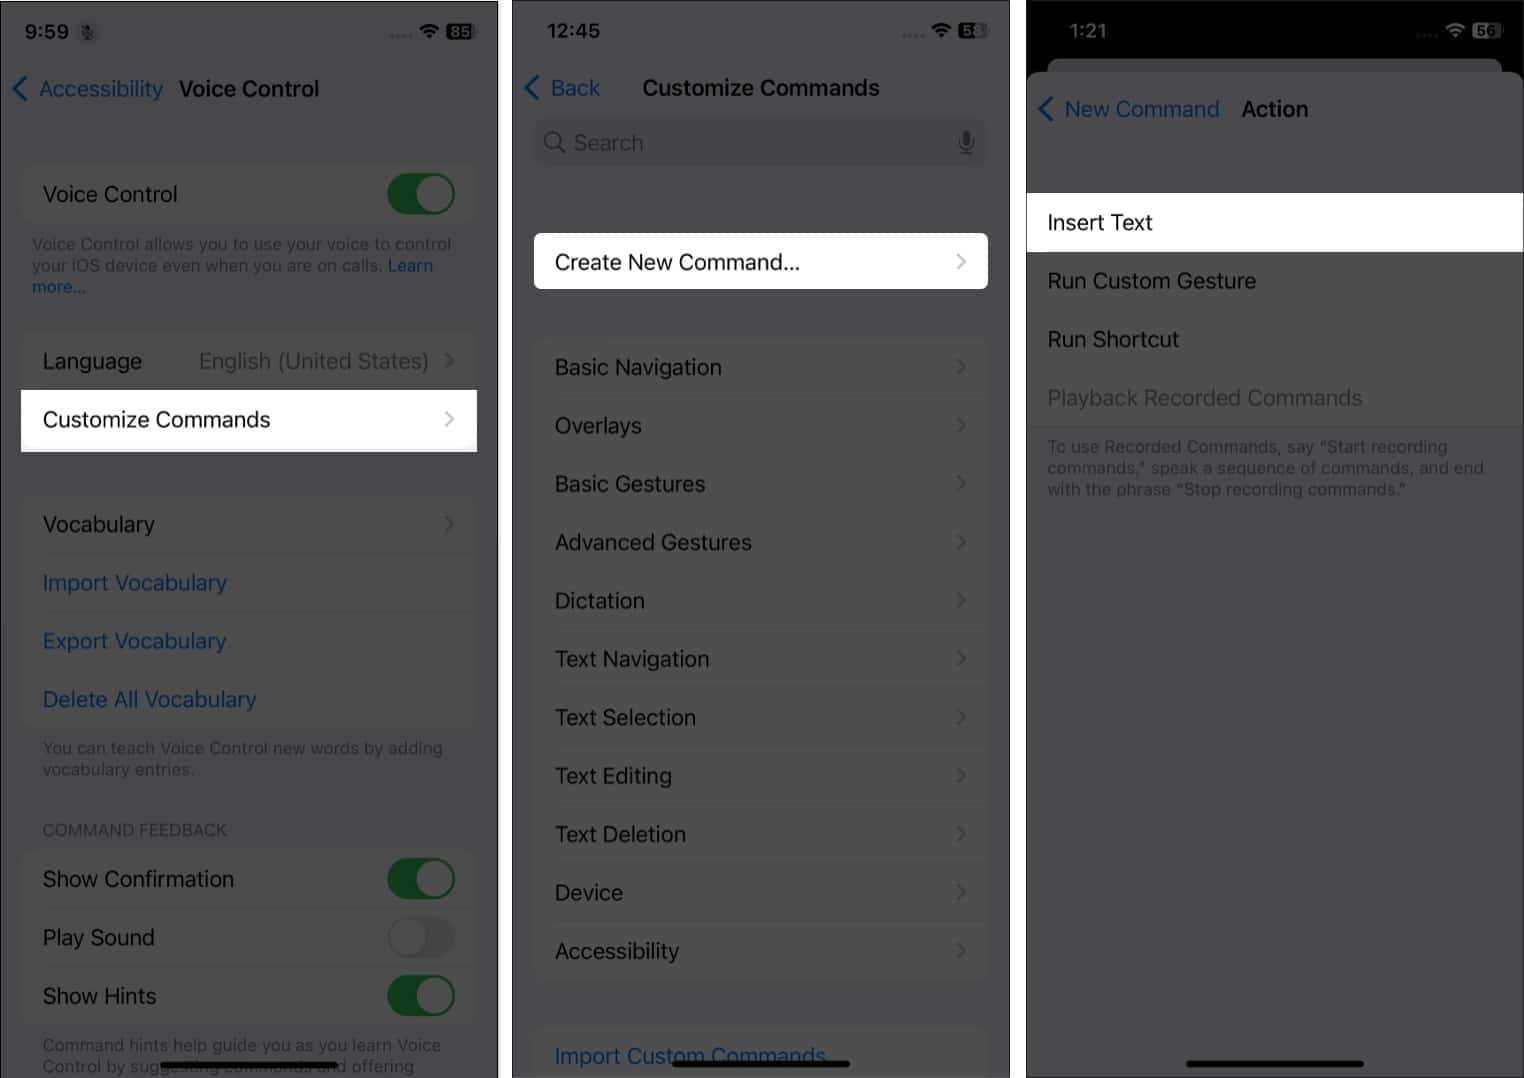 Select the action you want to perform to customize Voice Control commands